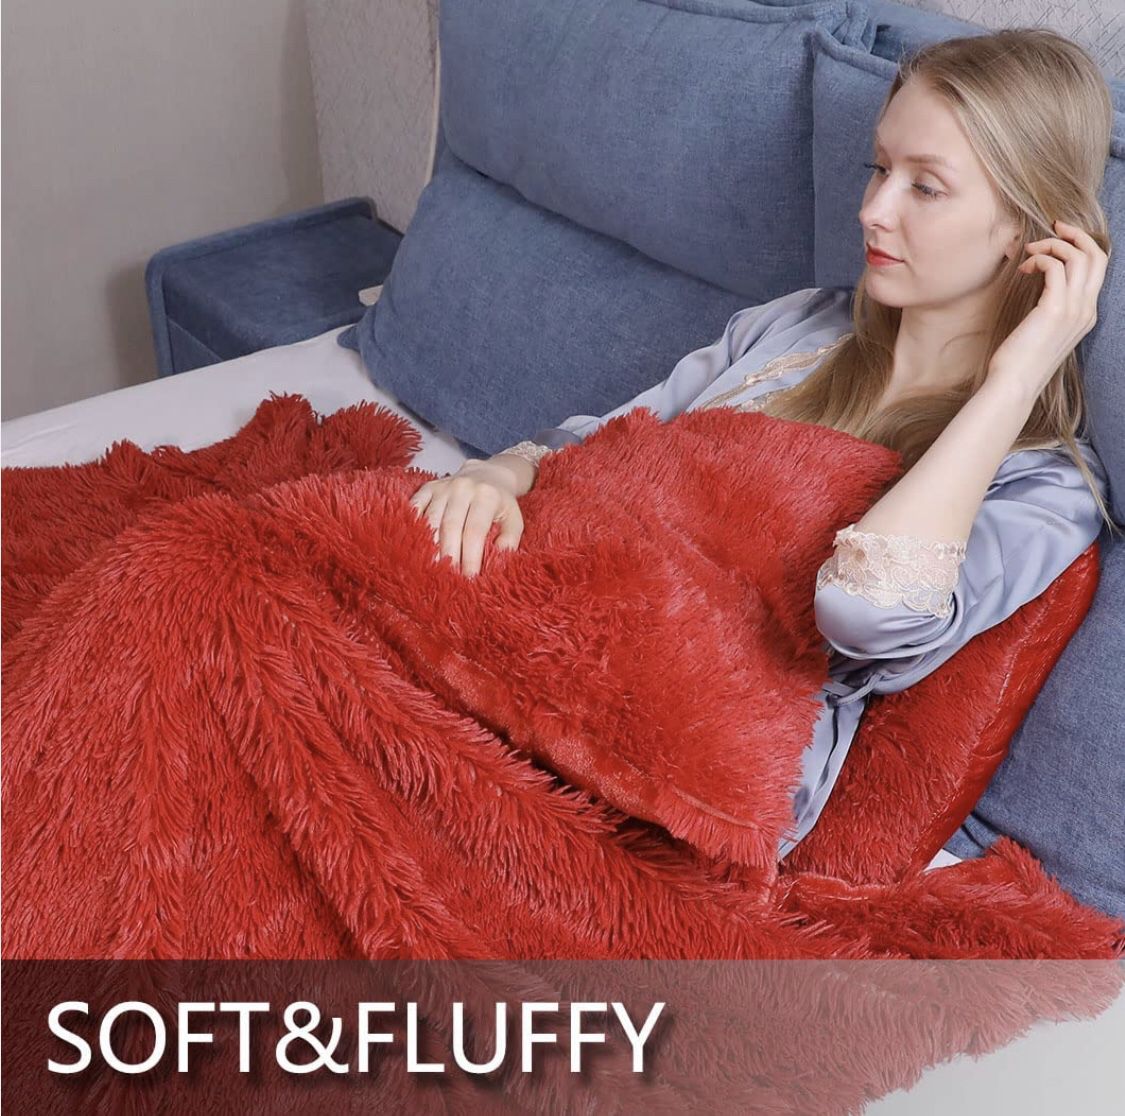 Thick Red Faux Fur Throw Winter Blanket,2 Layers,50" x 60",Soft Fluffy Fuzzy Cozy Blanket for Sofa Chair Couch Bed Farmhouse Decrations Photoshoot Pro